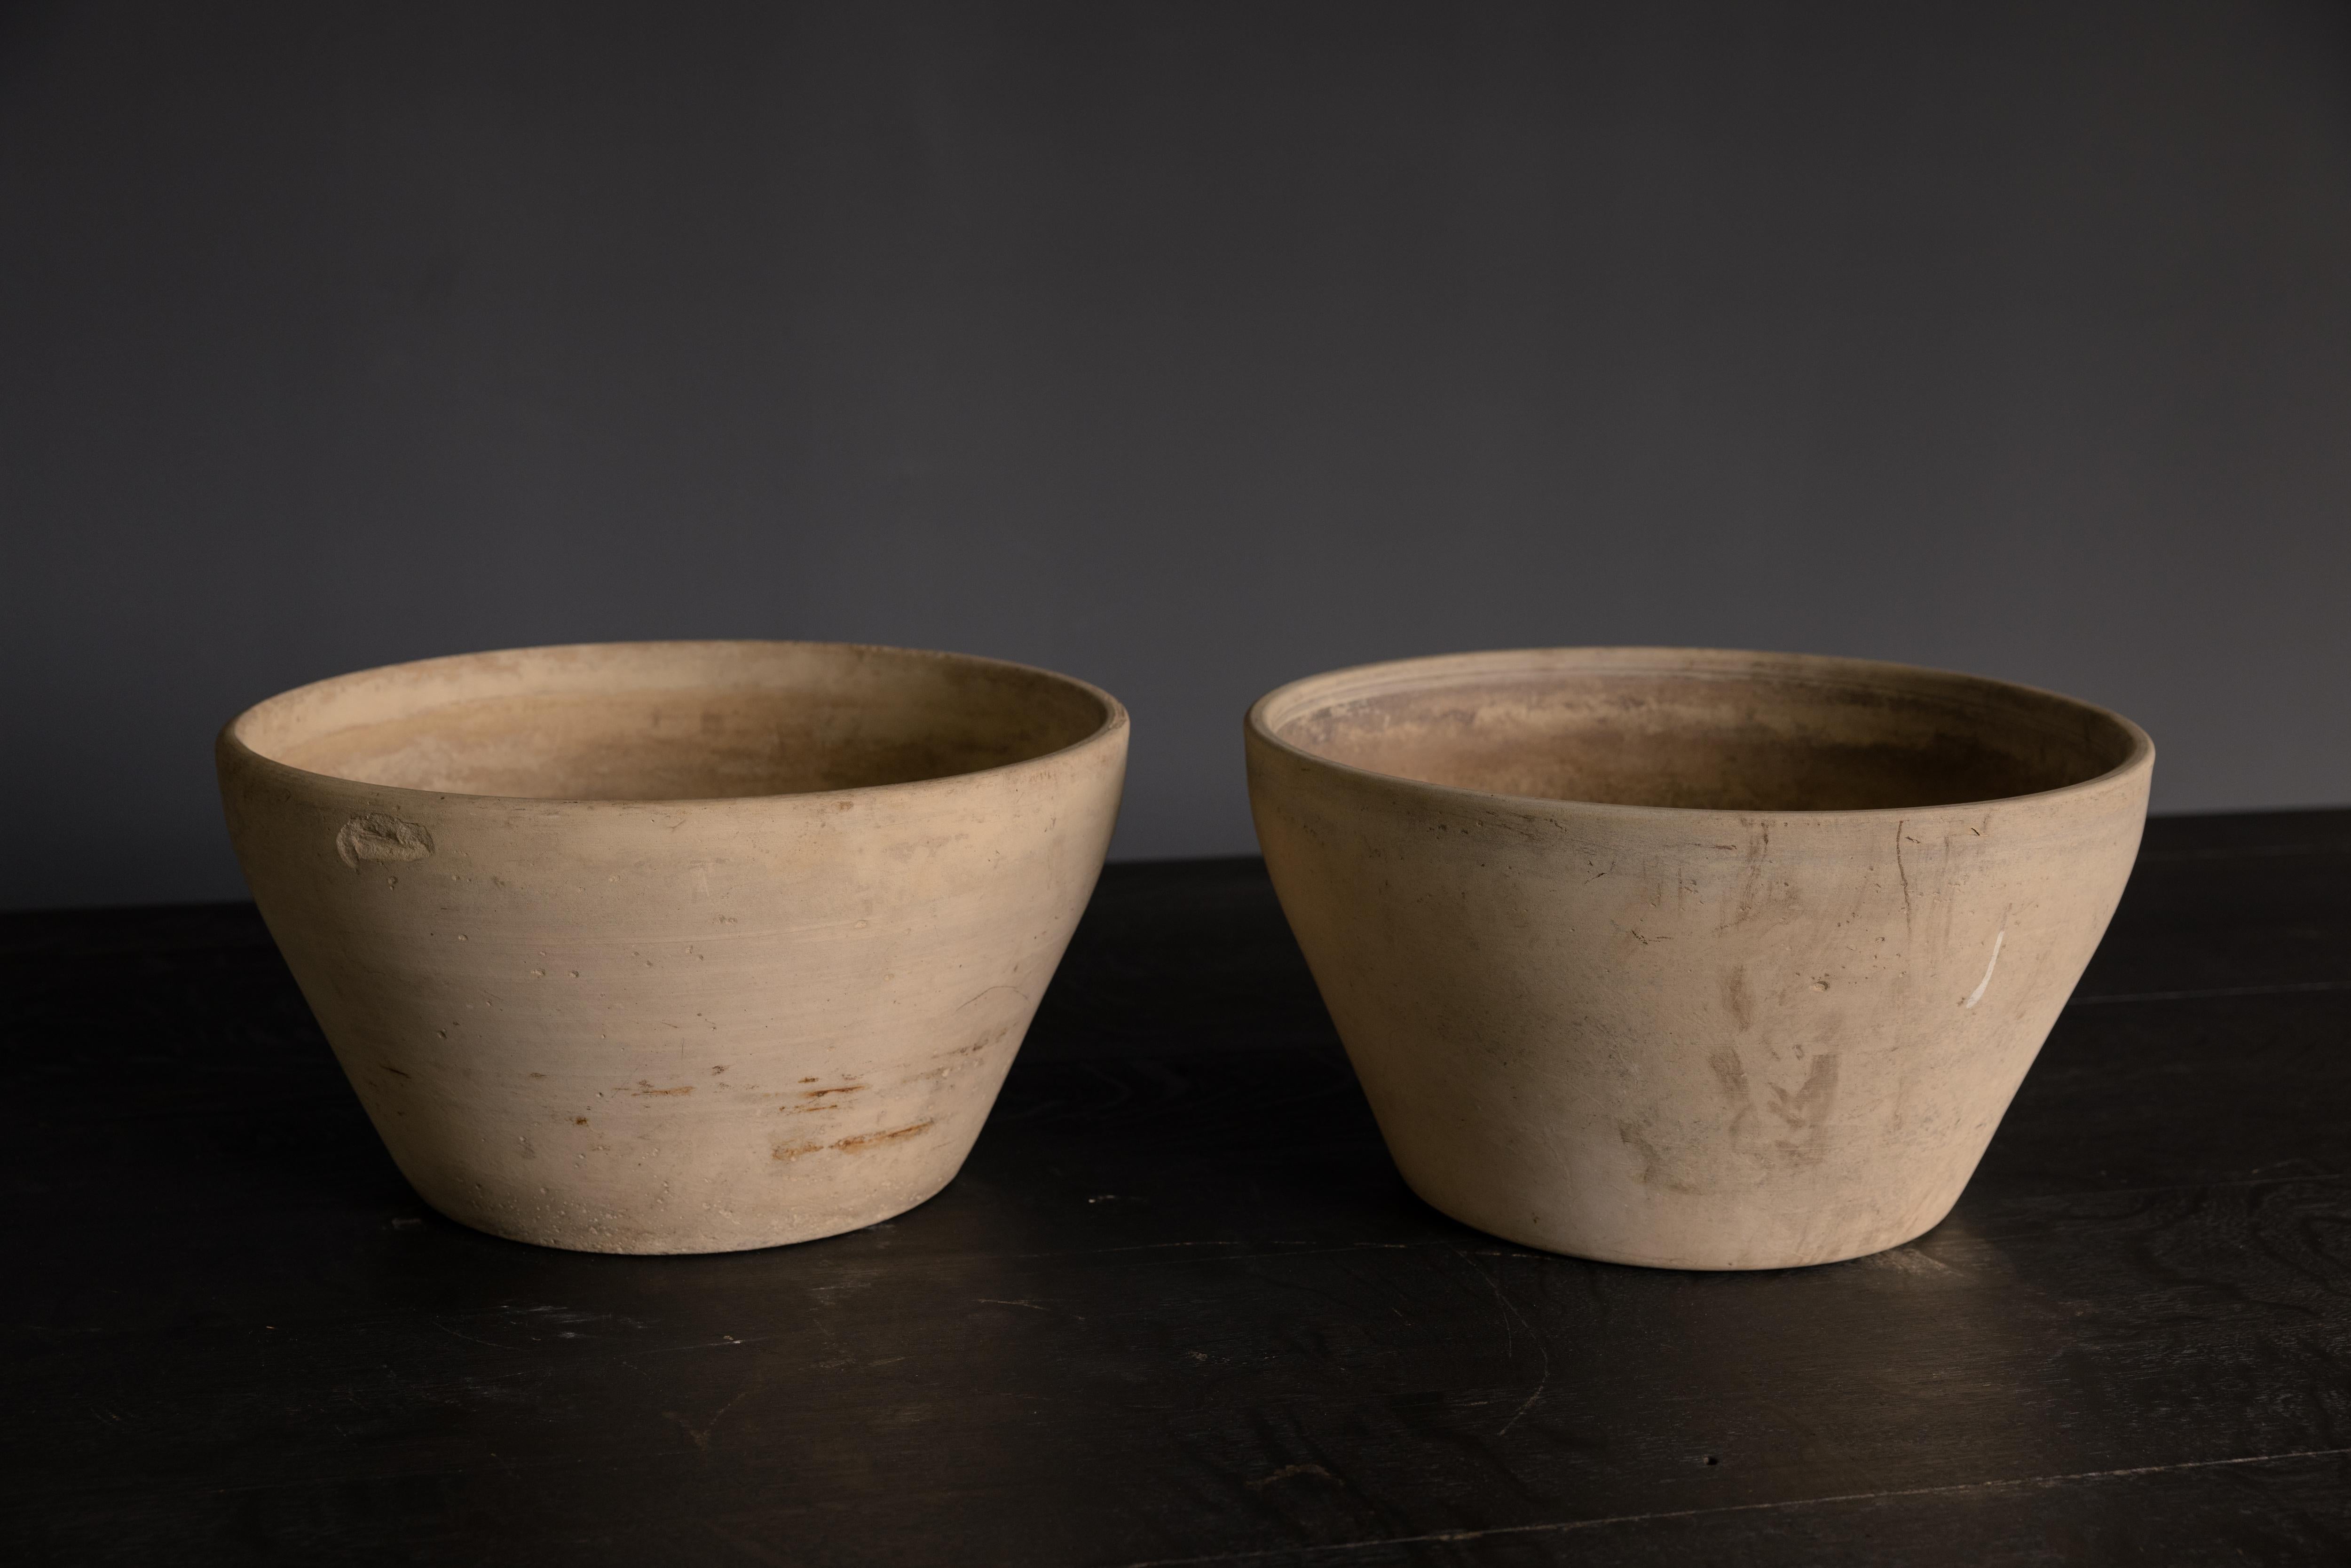 Bowl Planters in Bisque by Lagardo Tackett for Architectural Pottery, Midcentury, USA

H 9